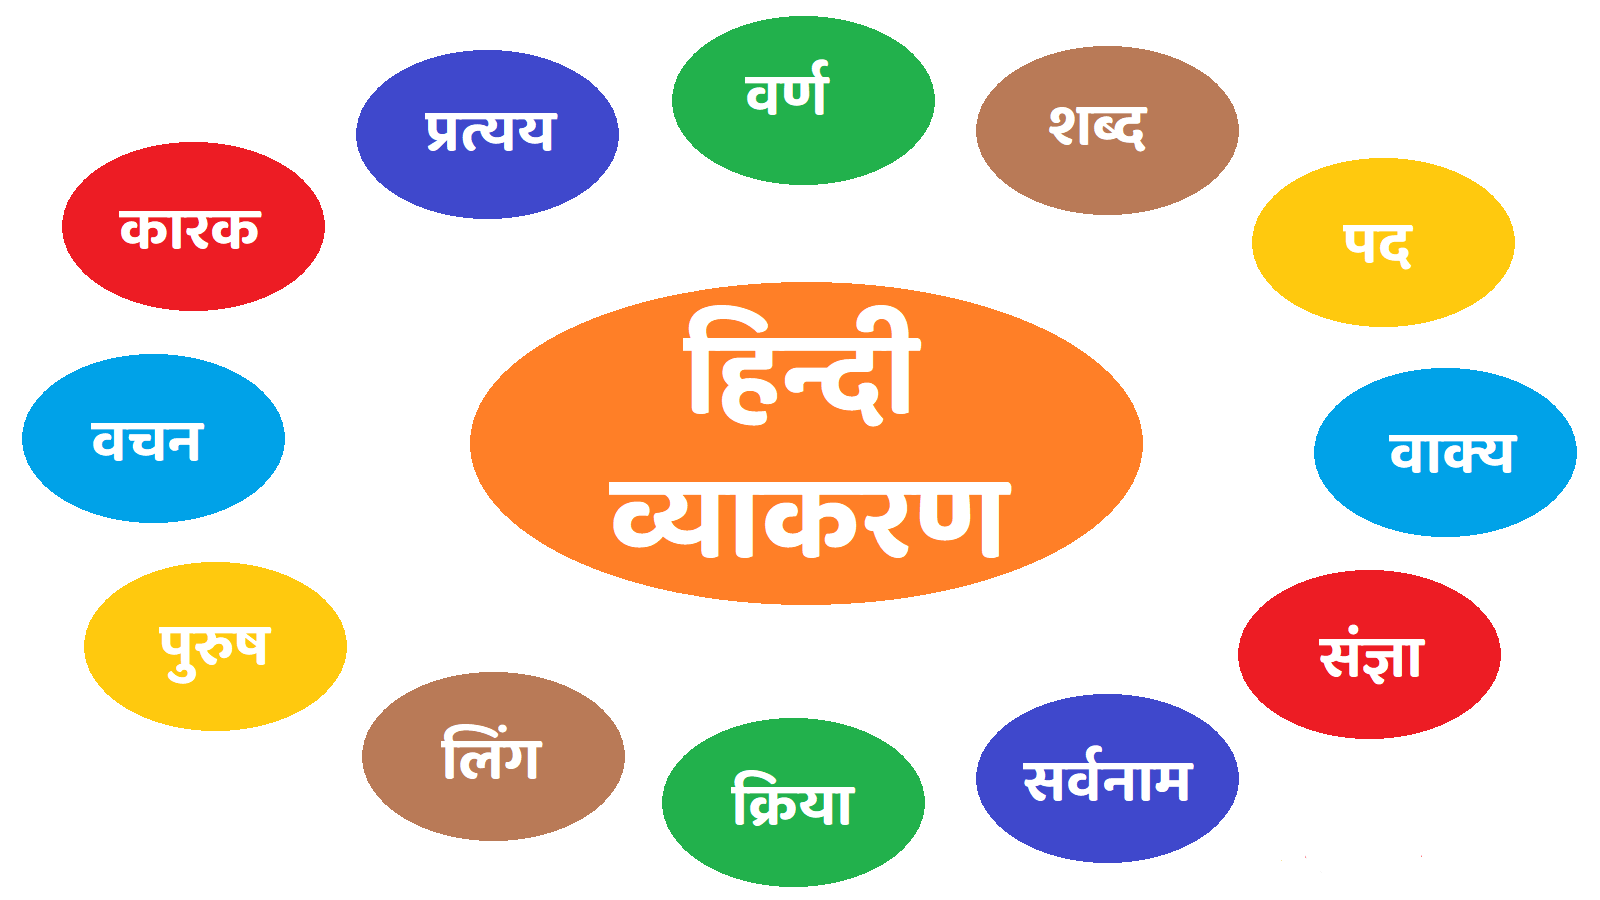 Hindi Grammar Online Test competitive exams